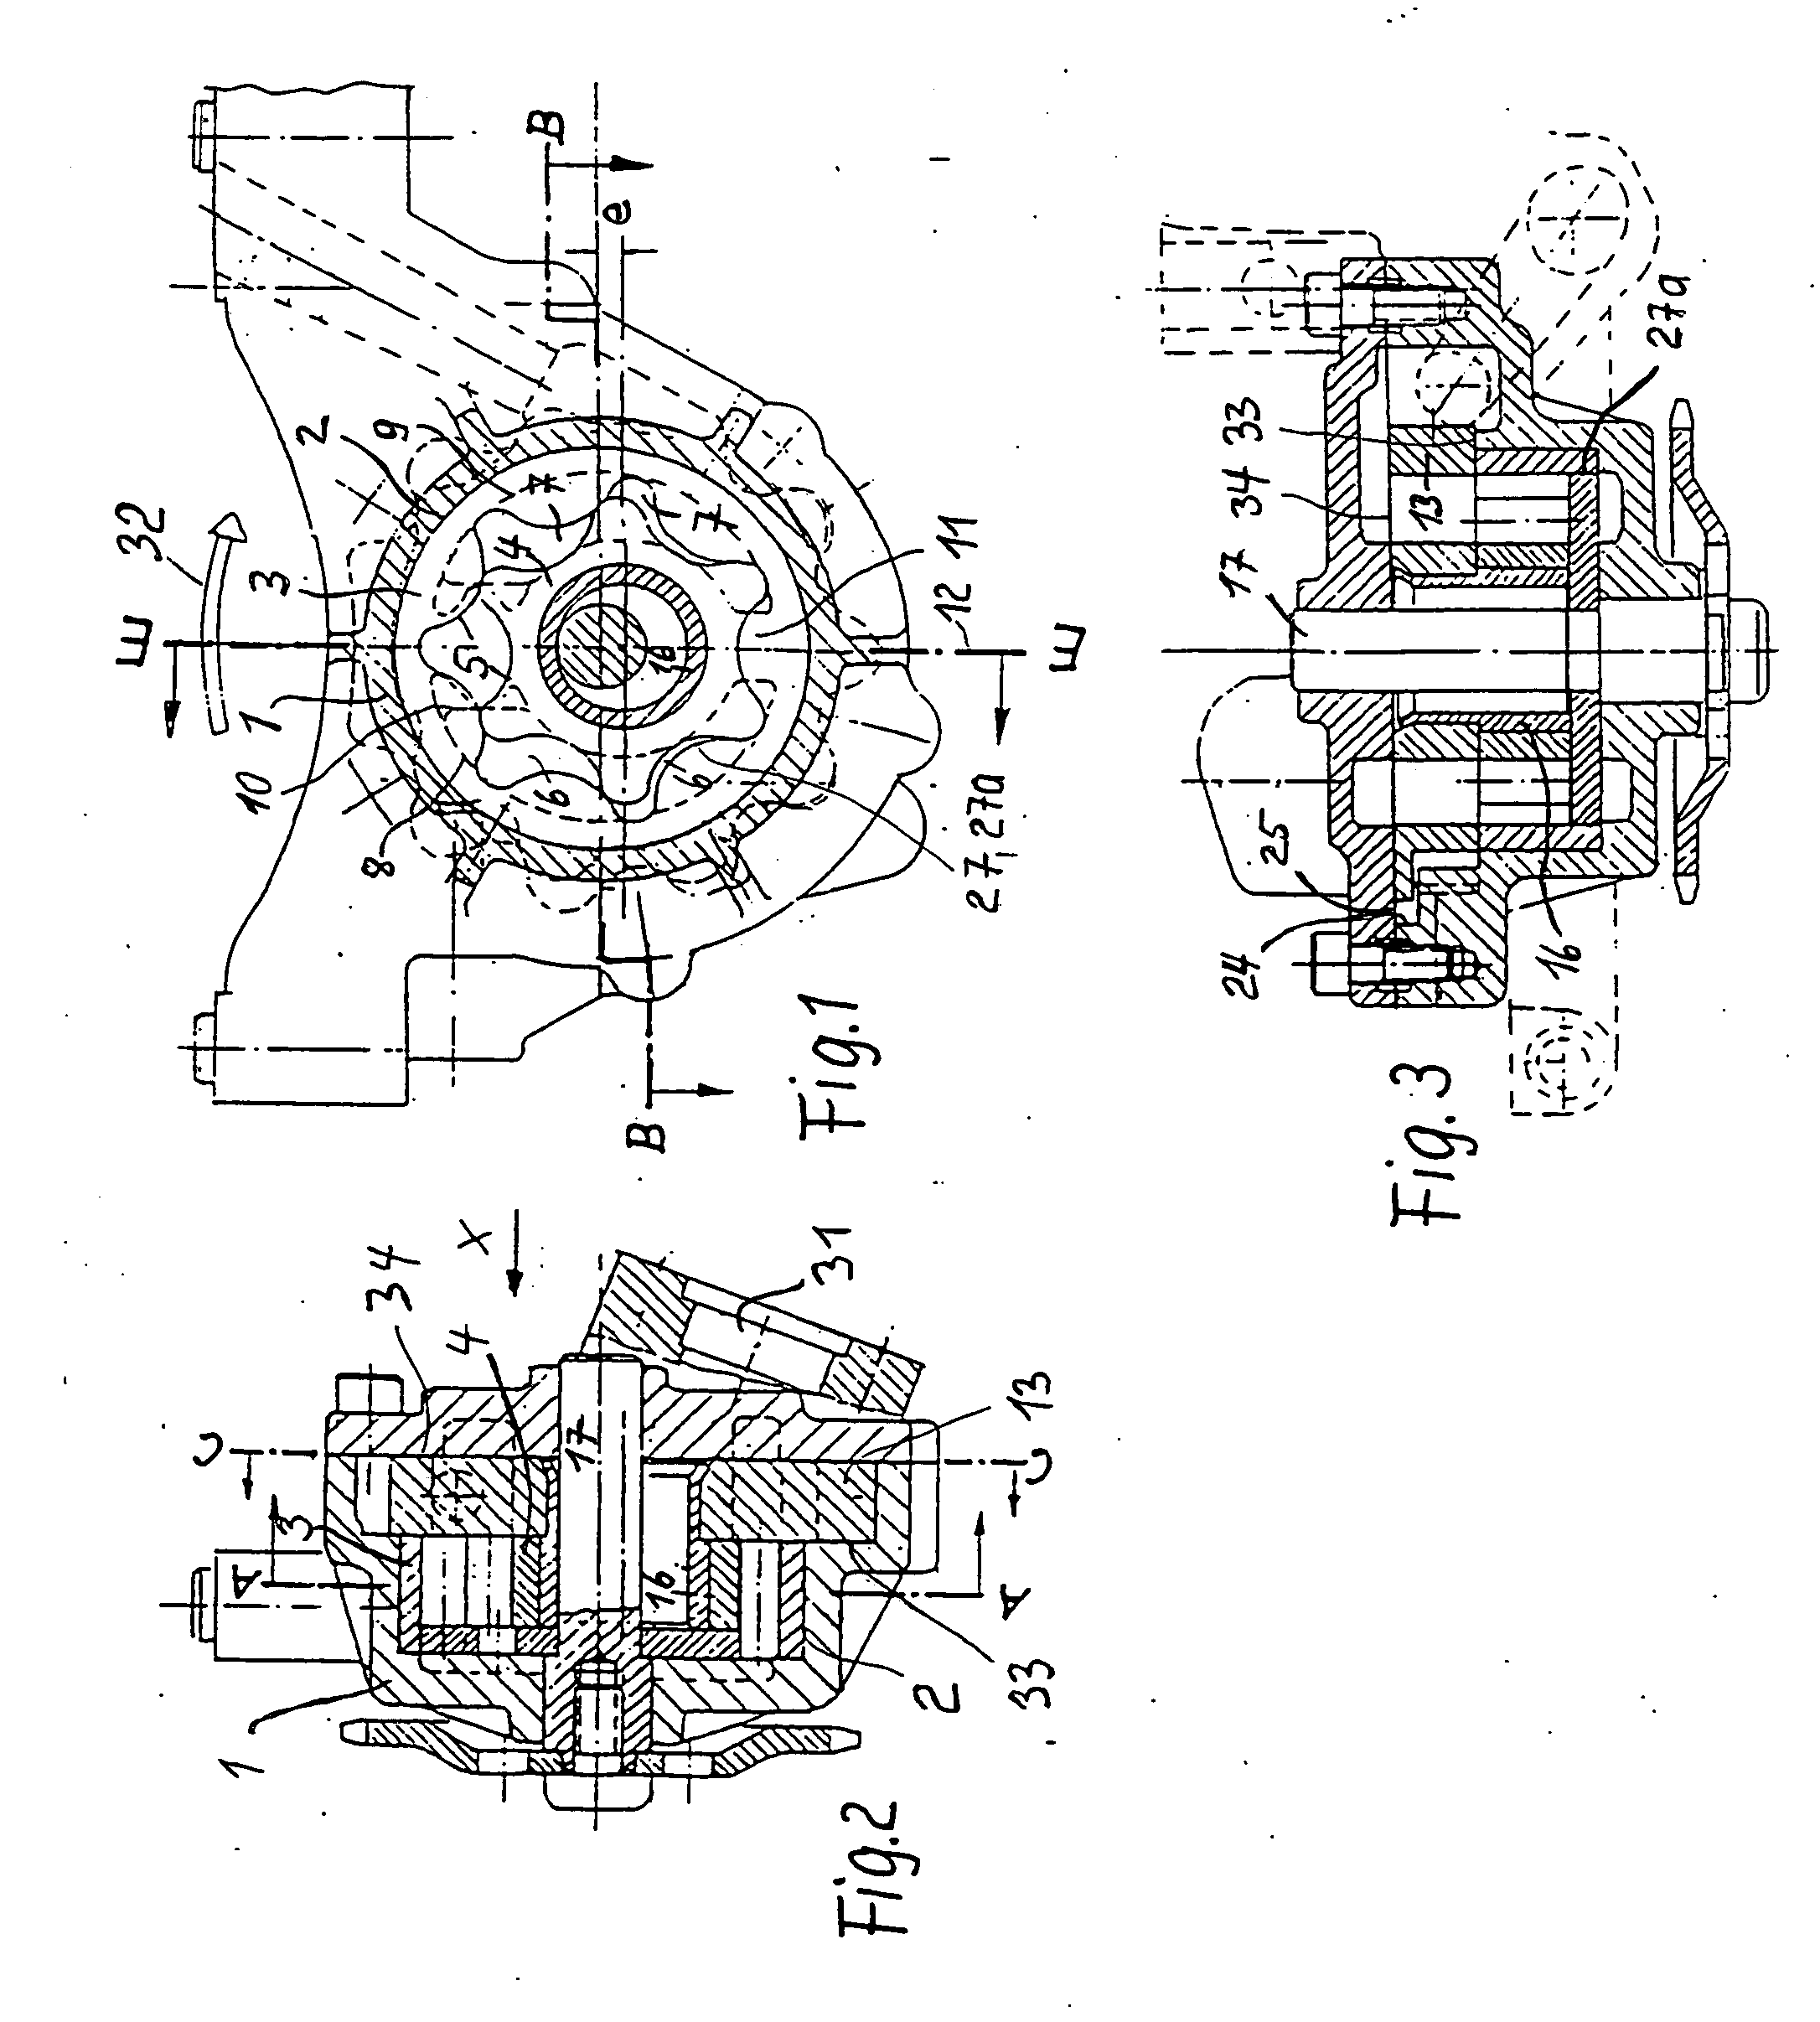 Displacement pump with variable volume flow